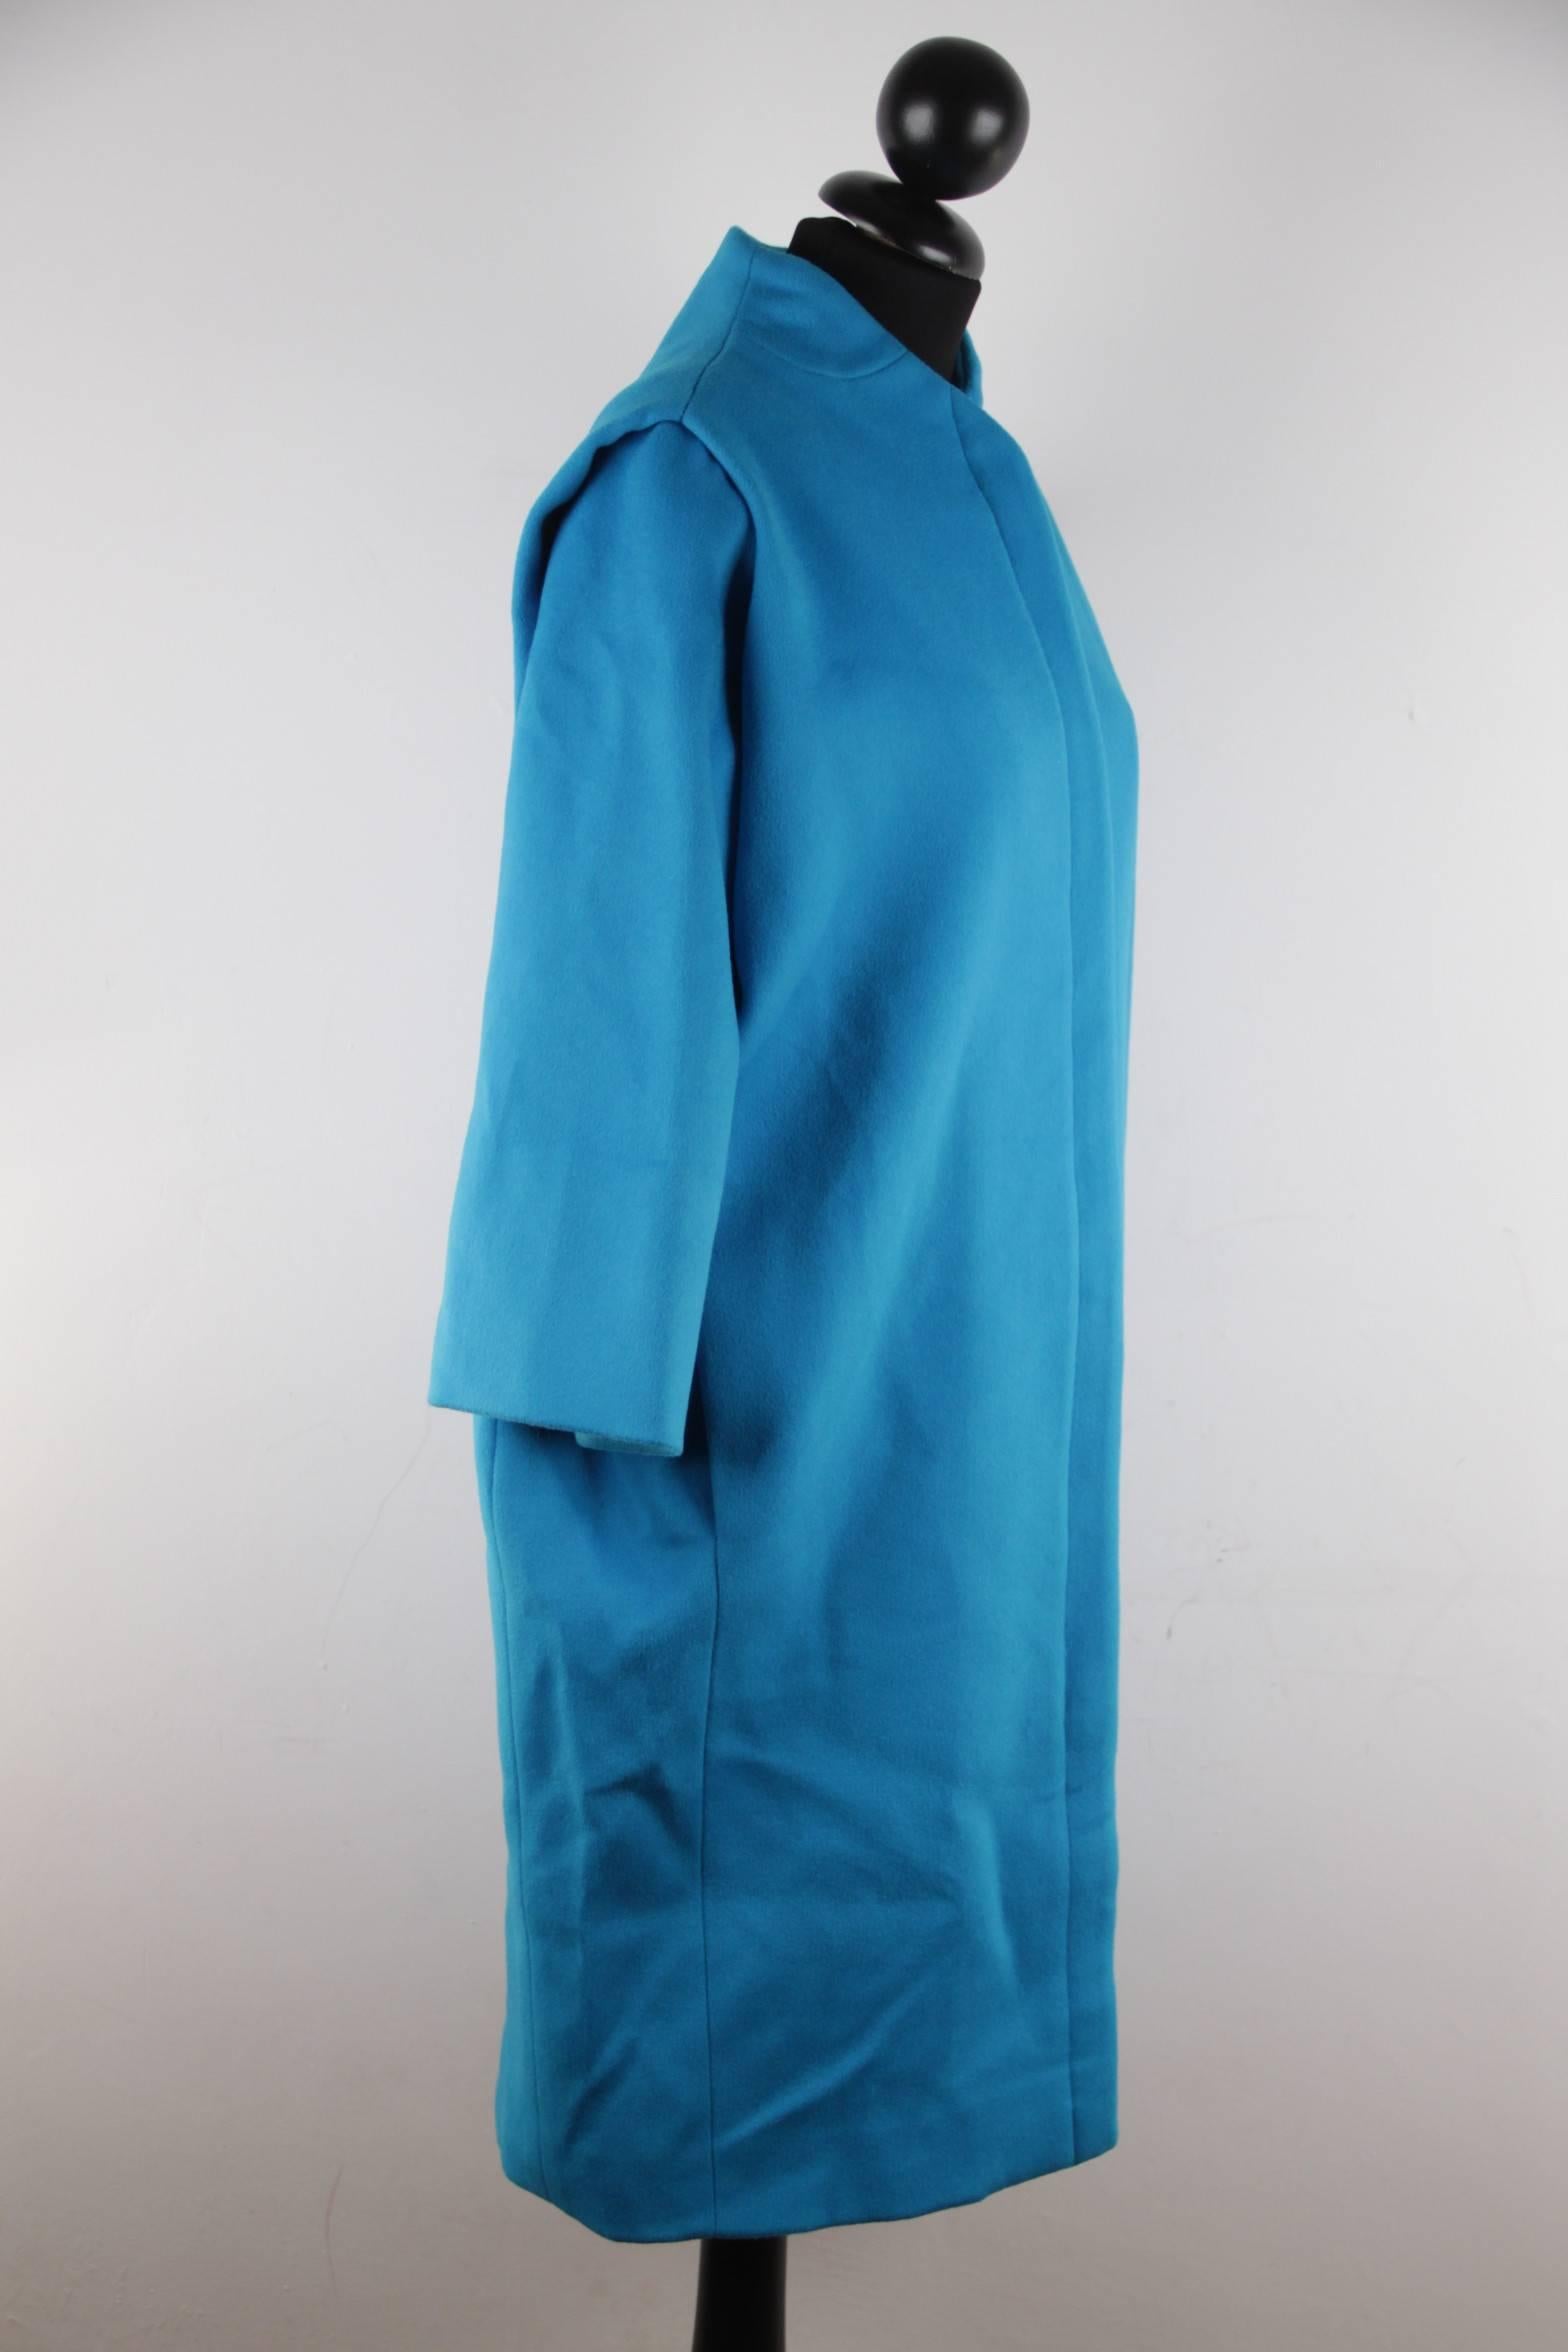 VERSACE Turquoise Wool BUSTIER DRESS & COAT Set SUIT 2007 Fall Collection 40 In Good Condition In Rome, Rome